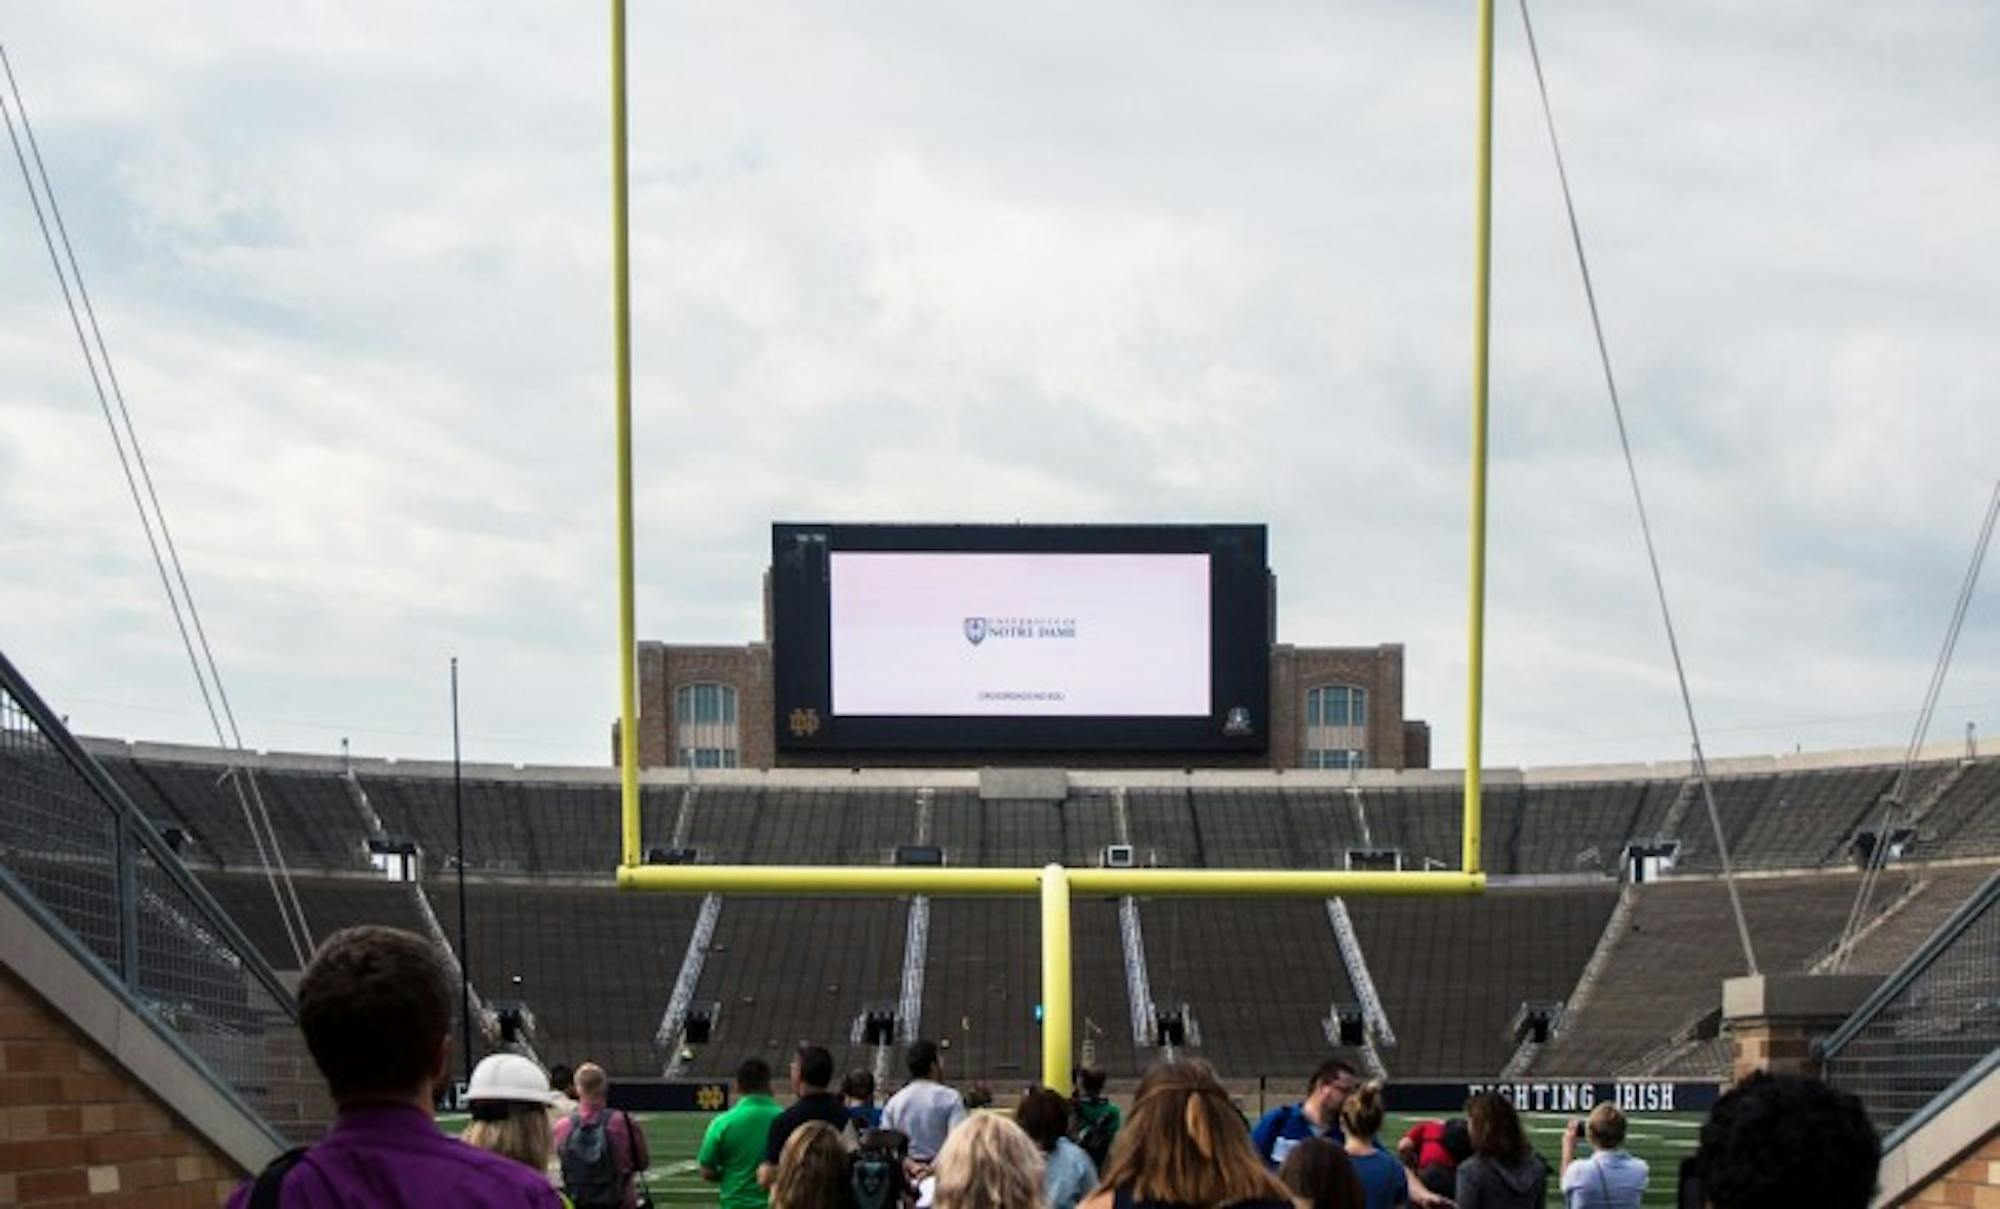 A 54 feet high by 96 feet wide video board is now located at the south end of Notre Dame Stadium. The video board will be used to show replays, highlight recognition ceremonies and tell Notre Dame stories.